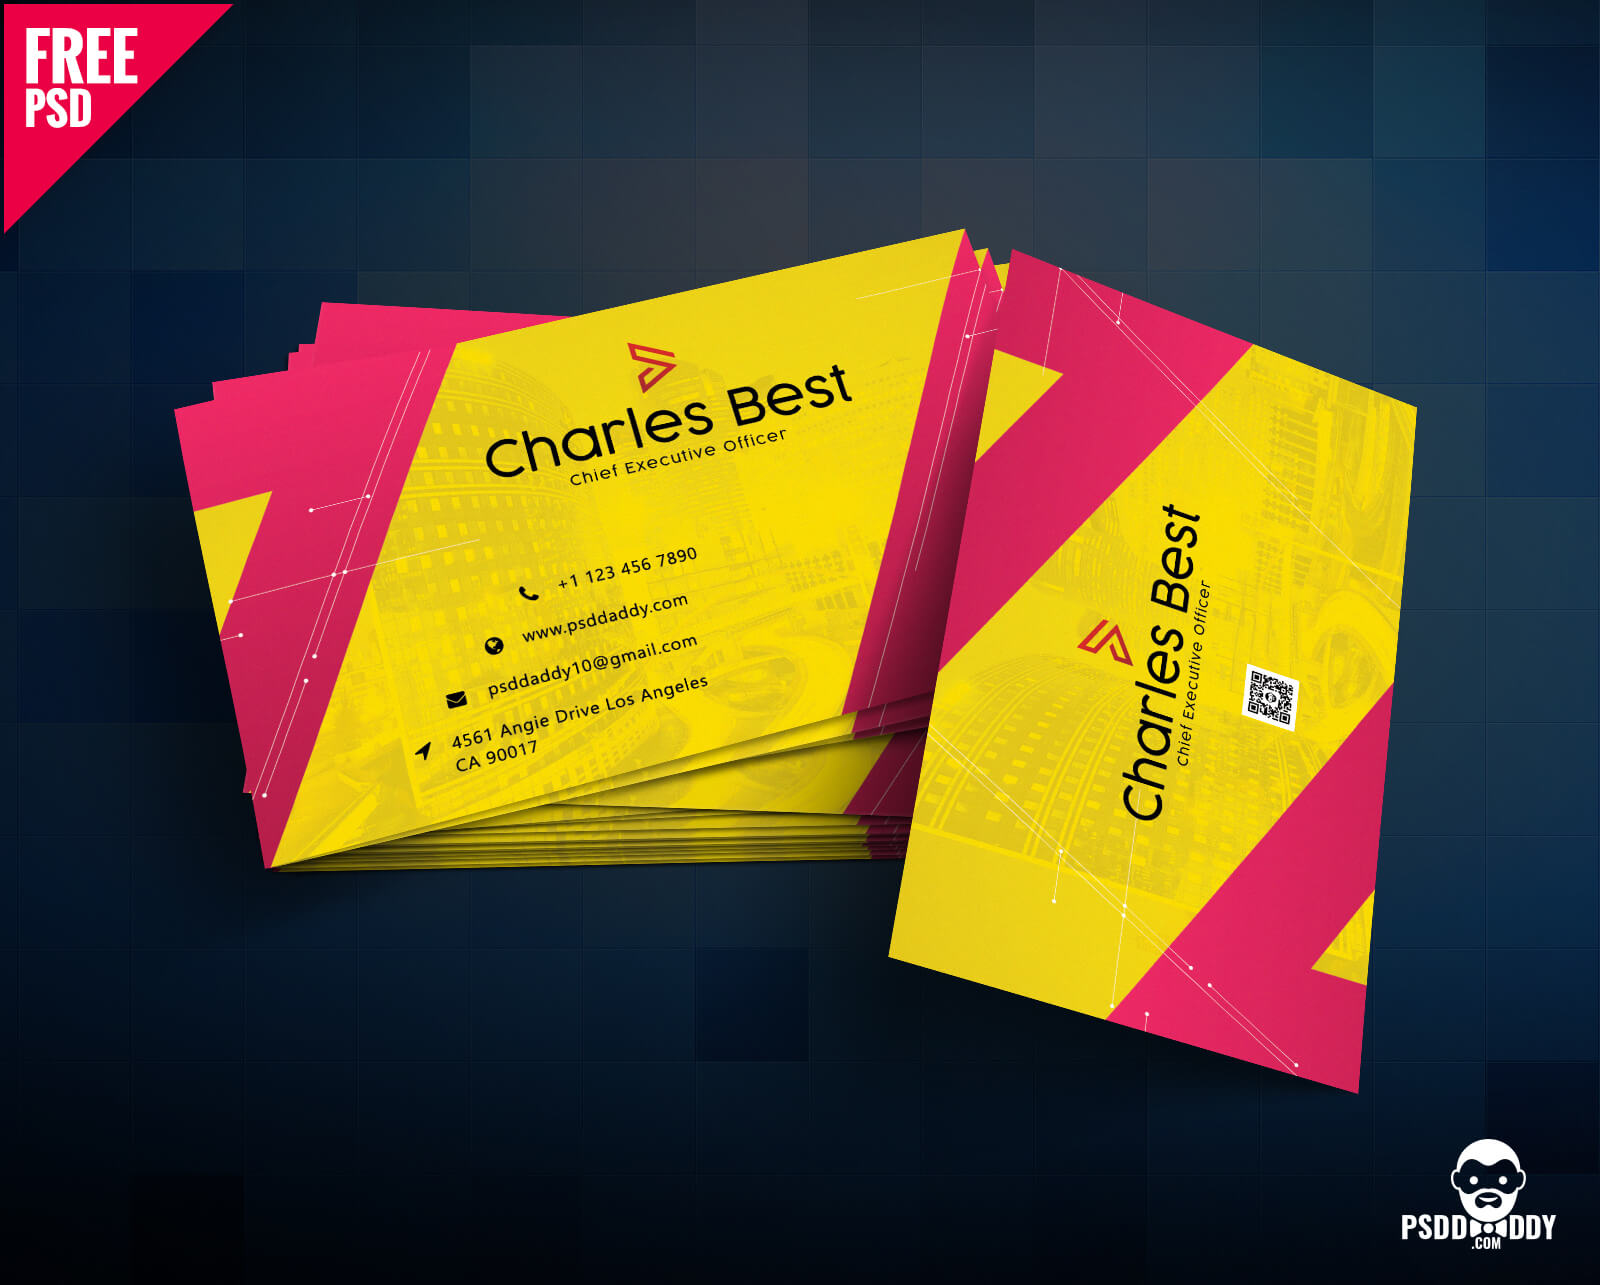 Download] Creative Business Card Free Psd | Psddaddy In Visiting Card Psd Template